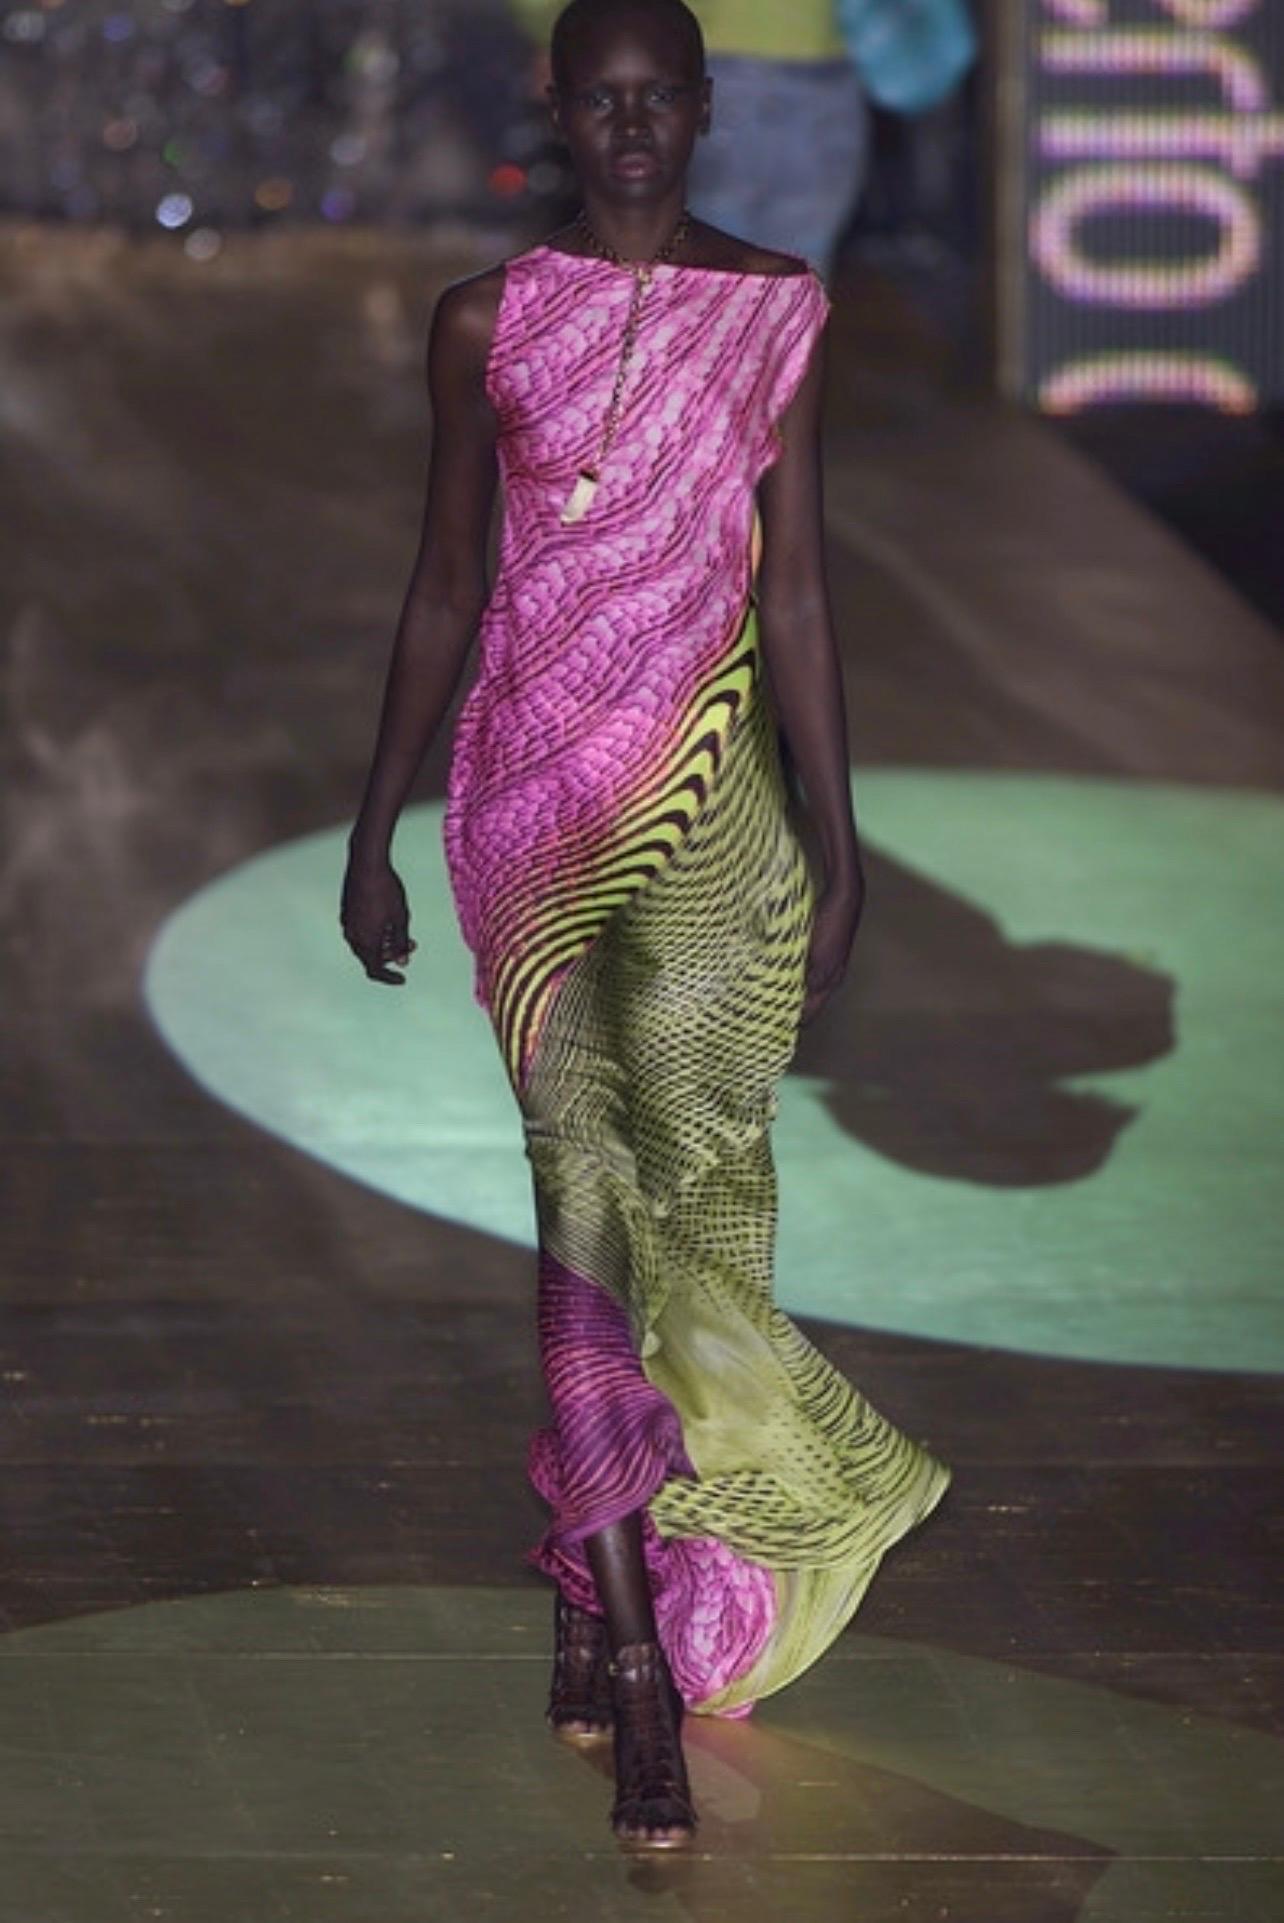 As seen on the runway on Alek Wek and on Mariacarla Boscono on the campaign of the iconic Spring 2001 collection.

100% printed silk.

Size Small, fits true to size. 

Excellent vintage condition.